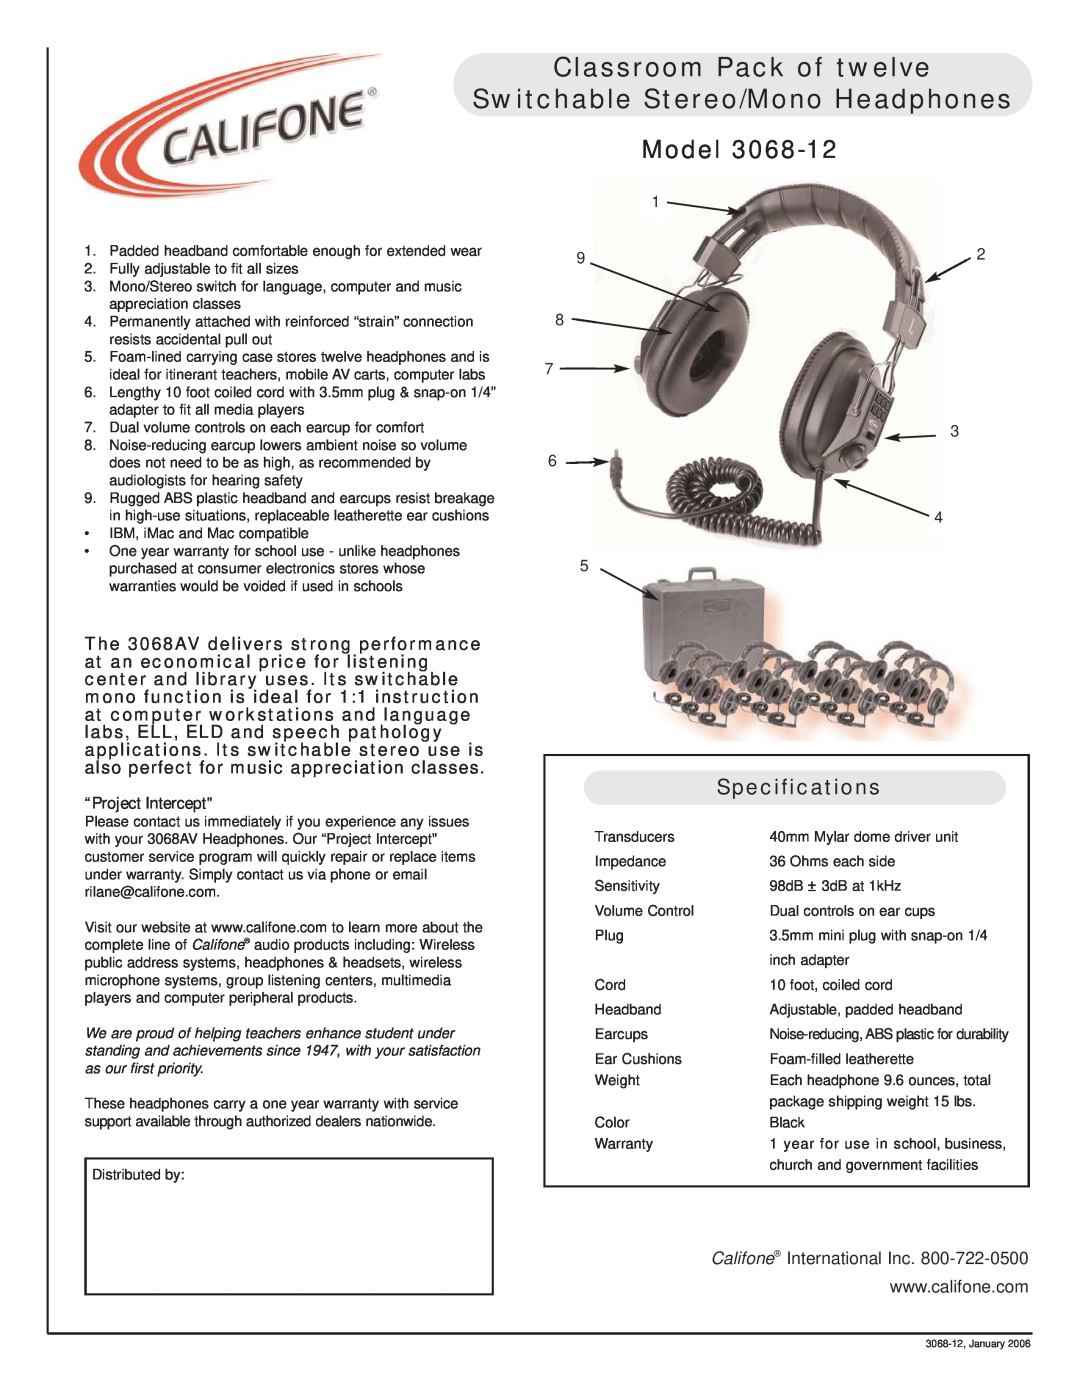 Califone 3068-12 specifications Classroom Pack of twelve, Switchable Stereo/Mono Headphones, Model, Specifications 